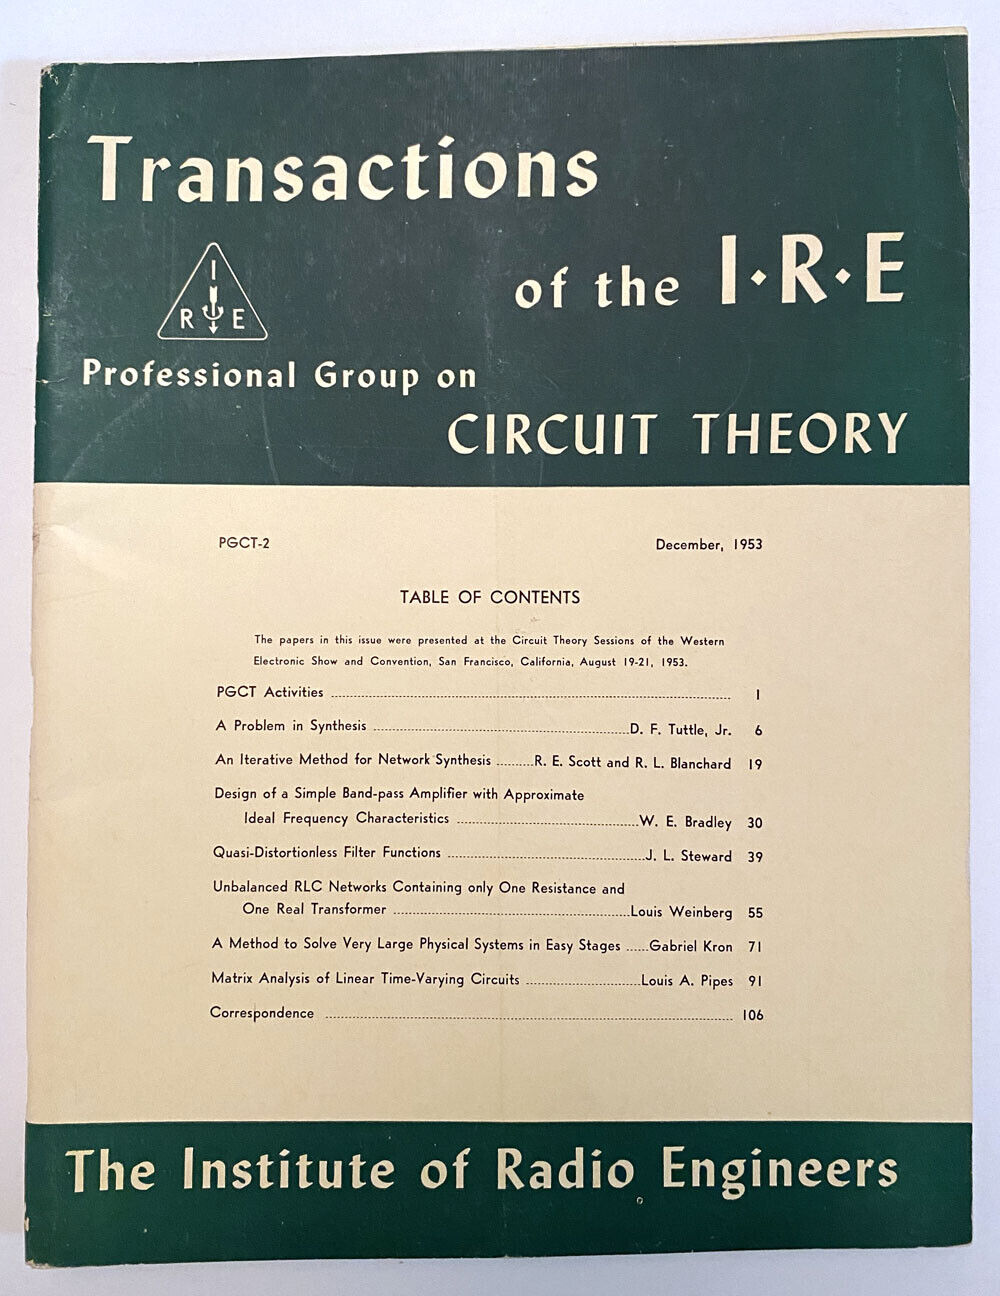 Transactions Of The I.R.E. Circuit Theory CT-1 #1 1st Issue March 1954